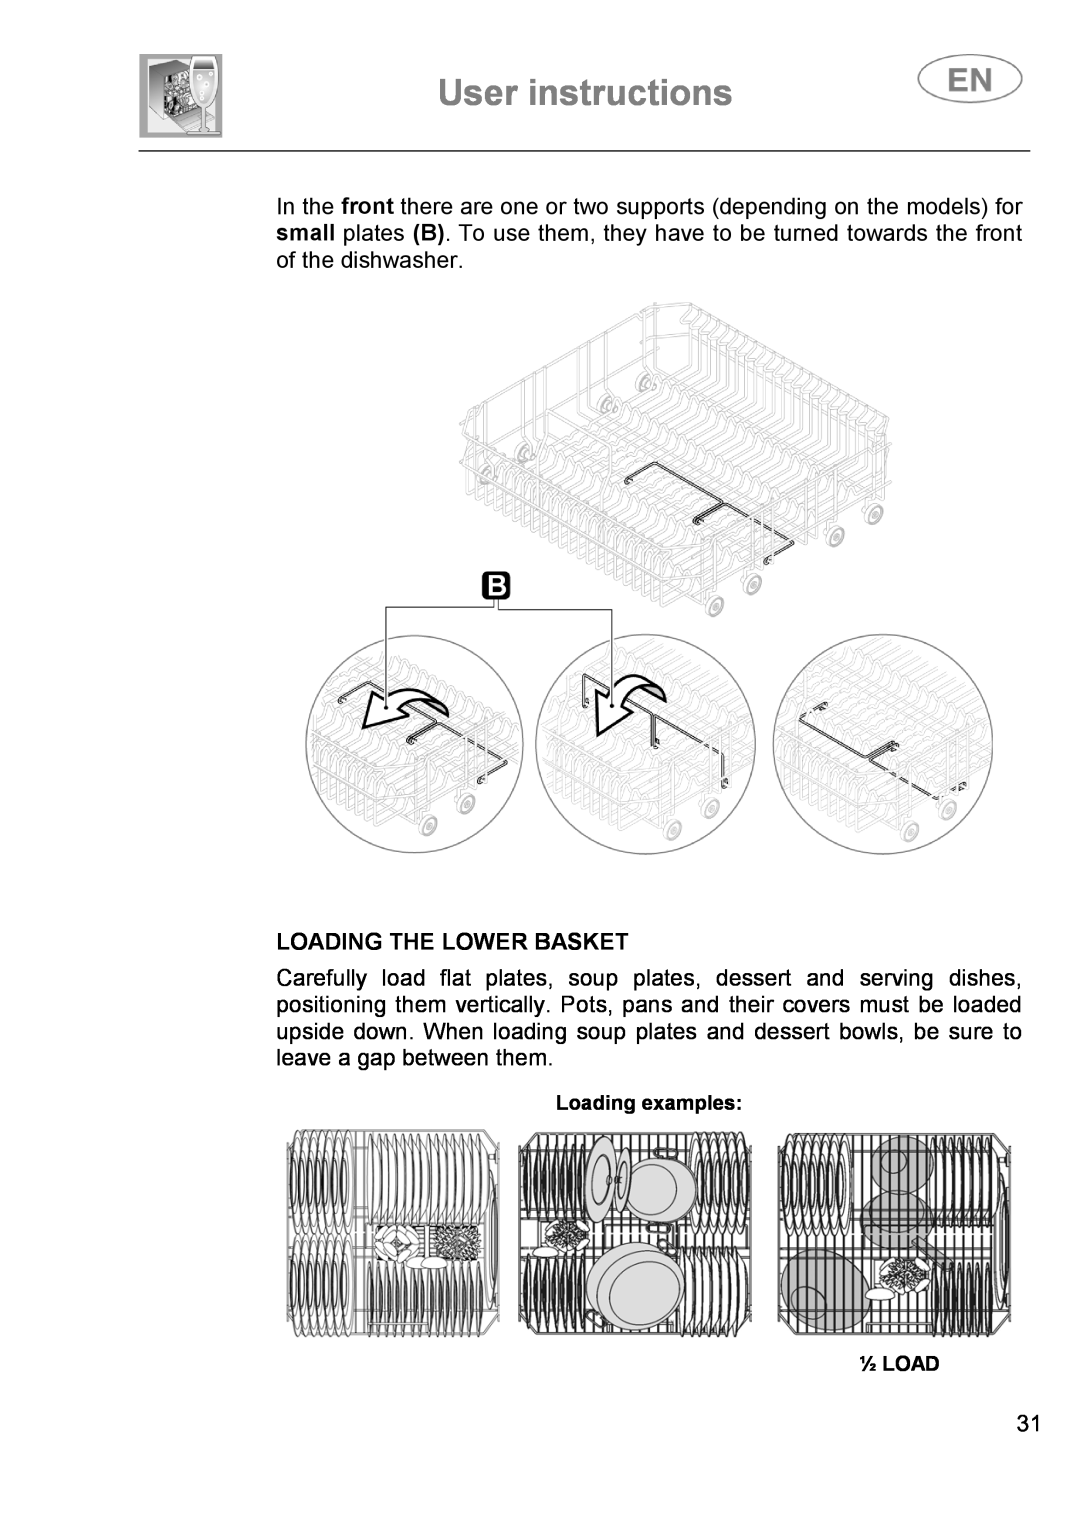 Smeg DI614H instruction manual User instructions, Loading The Lower Basket, Loading examples ½ LOAD 